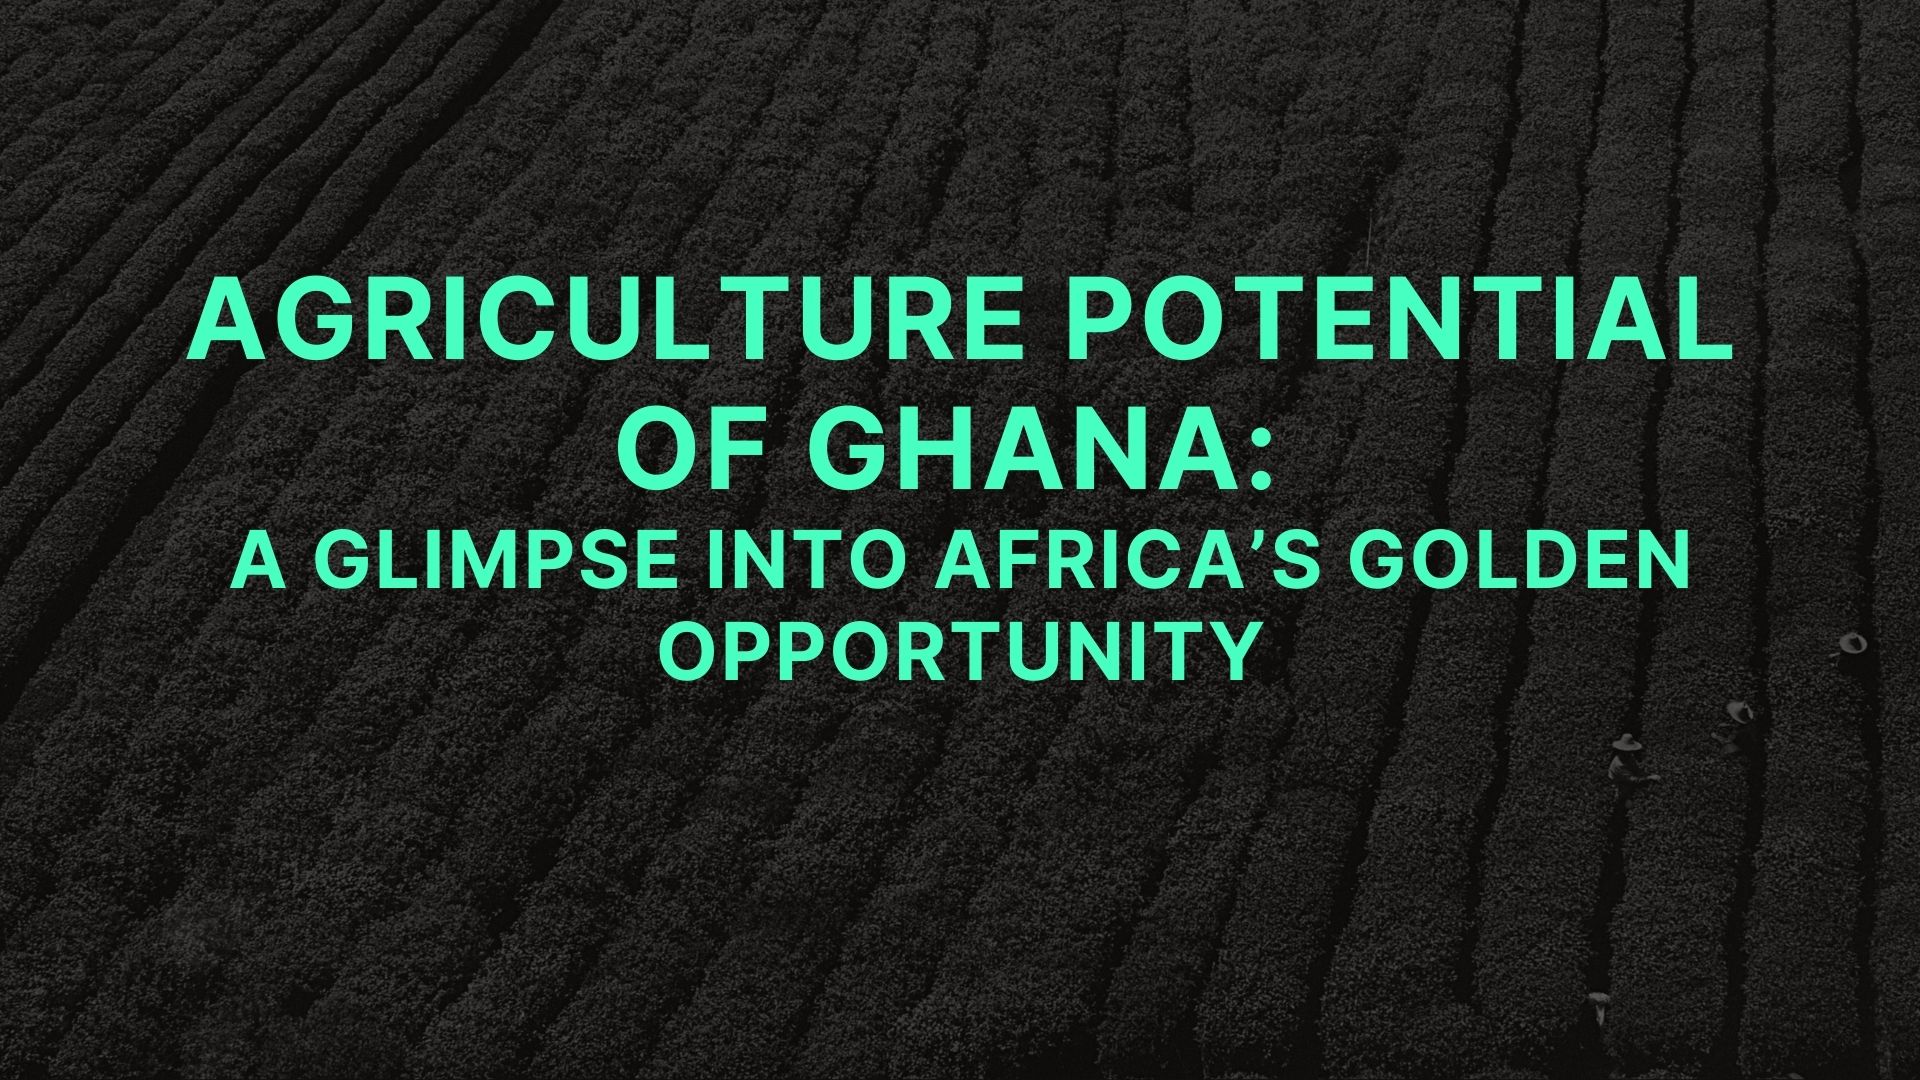 Agriculture Potential of Ghana: A Glimpse into Africa’s Golden Opportunity